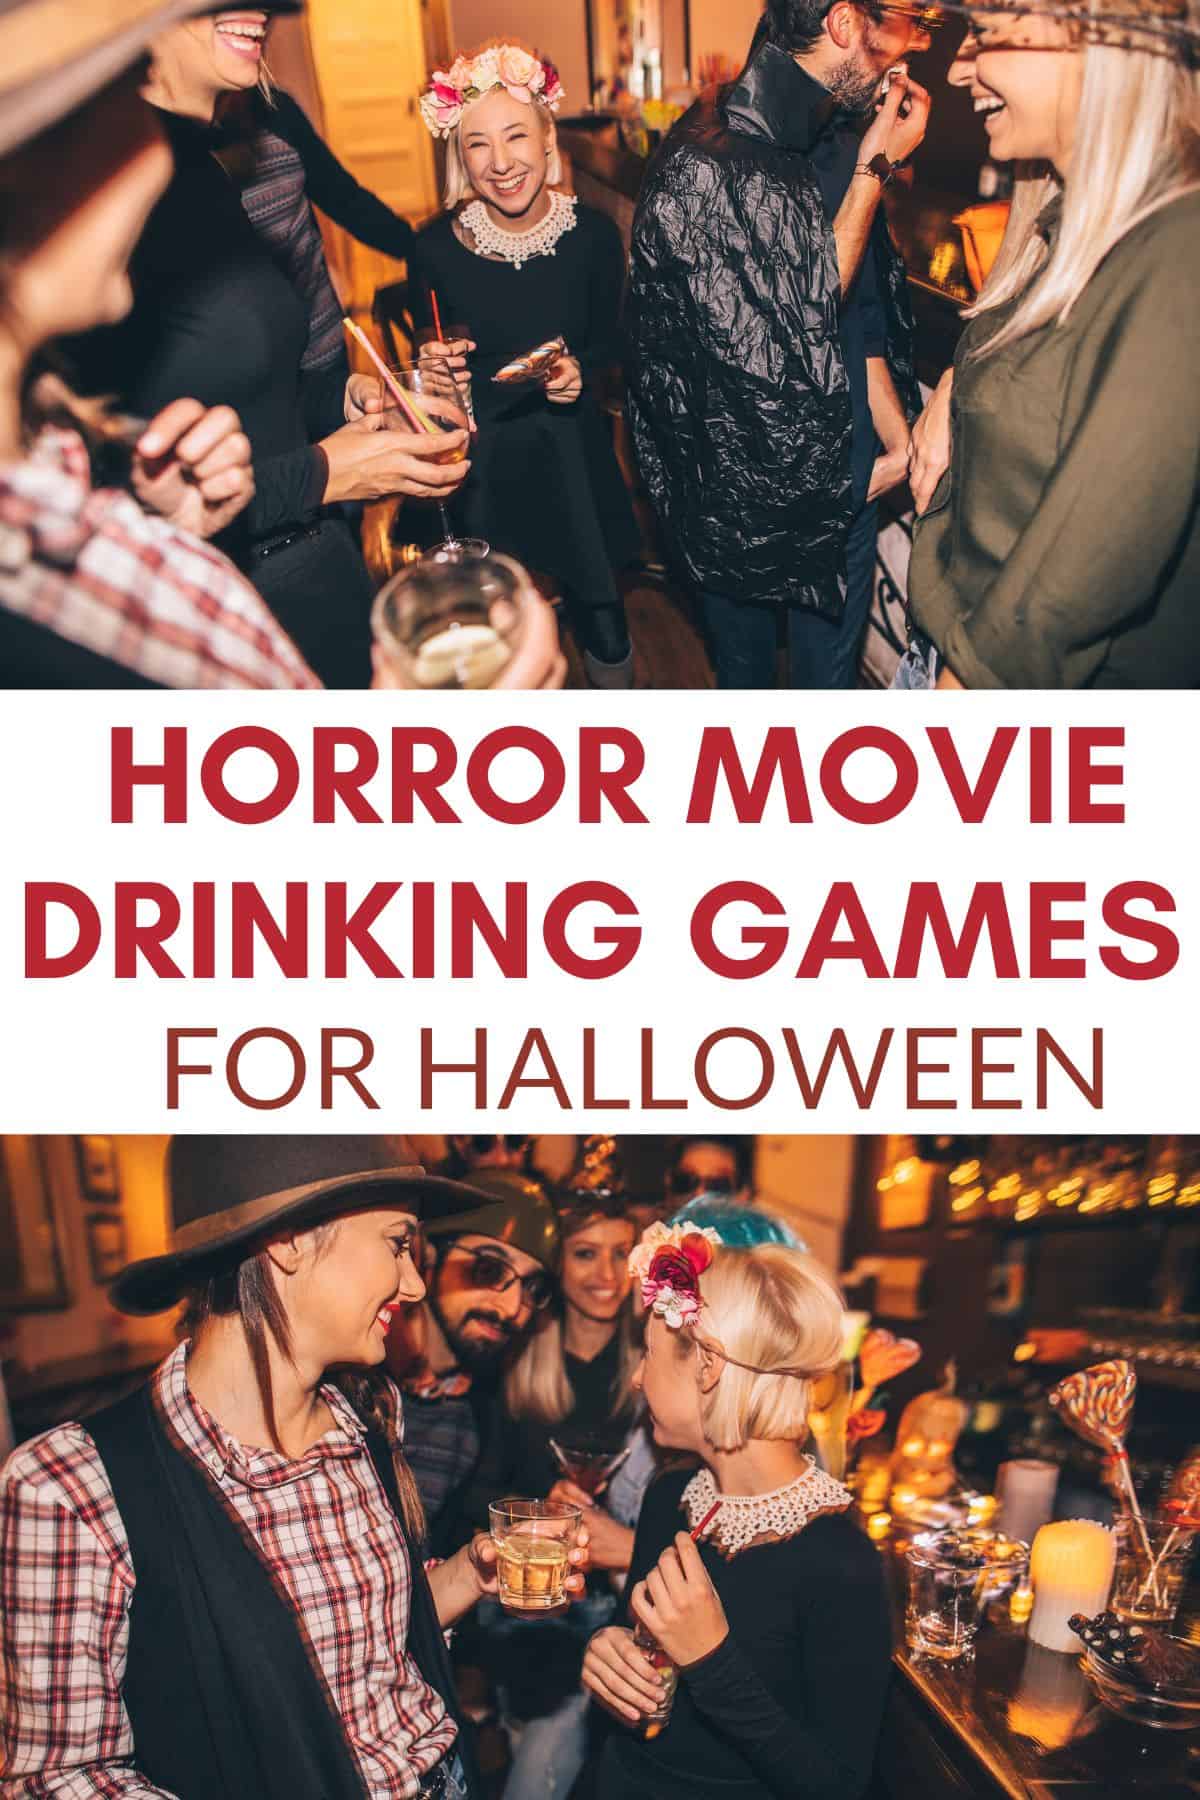 collage of friends at a Halloween party - text overlay says Horror Movie Drinking Games for Halloween